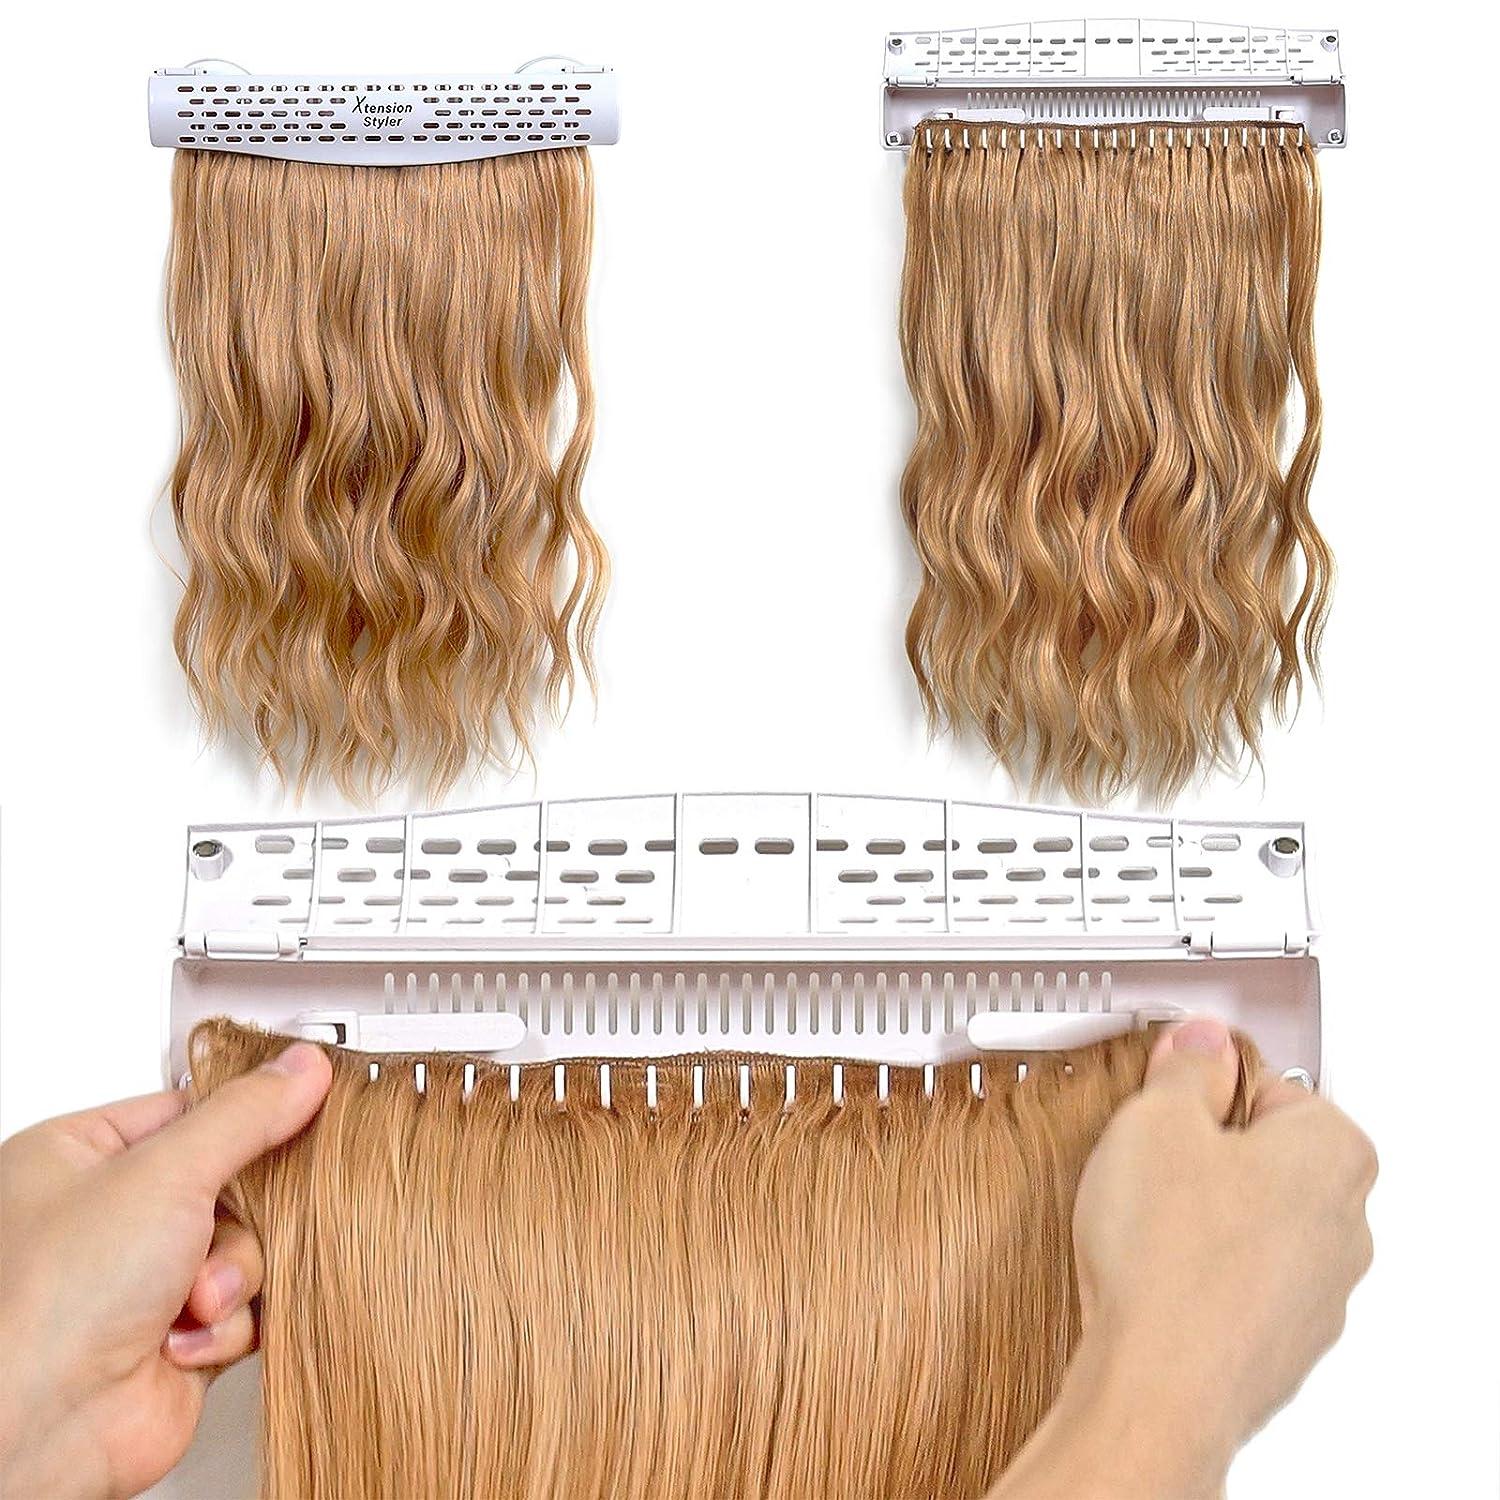 Hair Extension Holder and Hanger Professional Hair Styling Tool